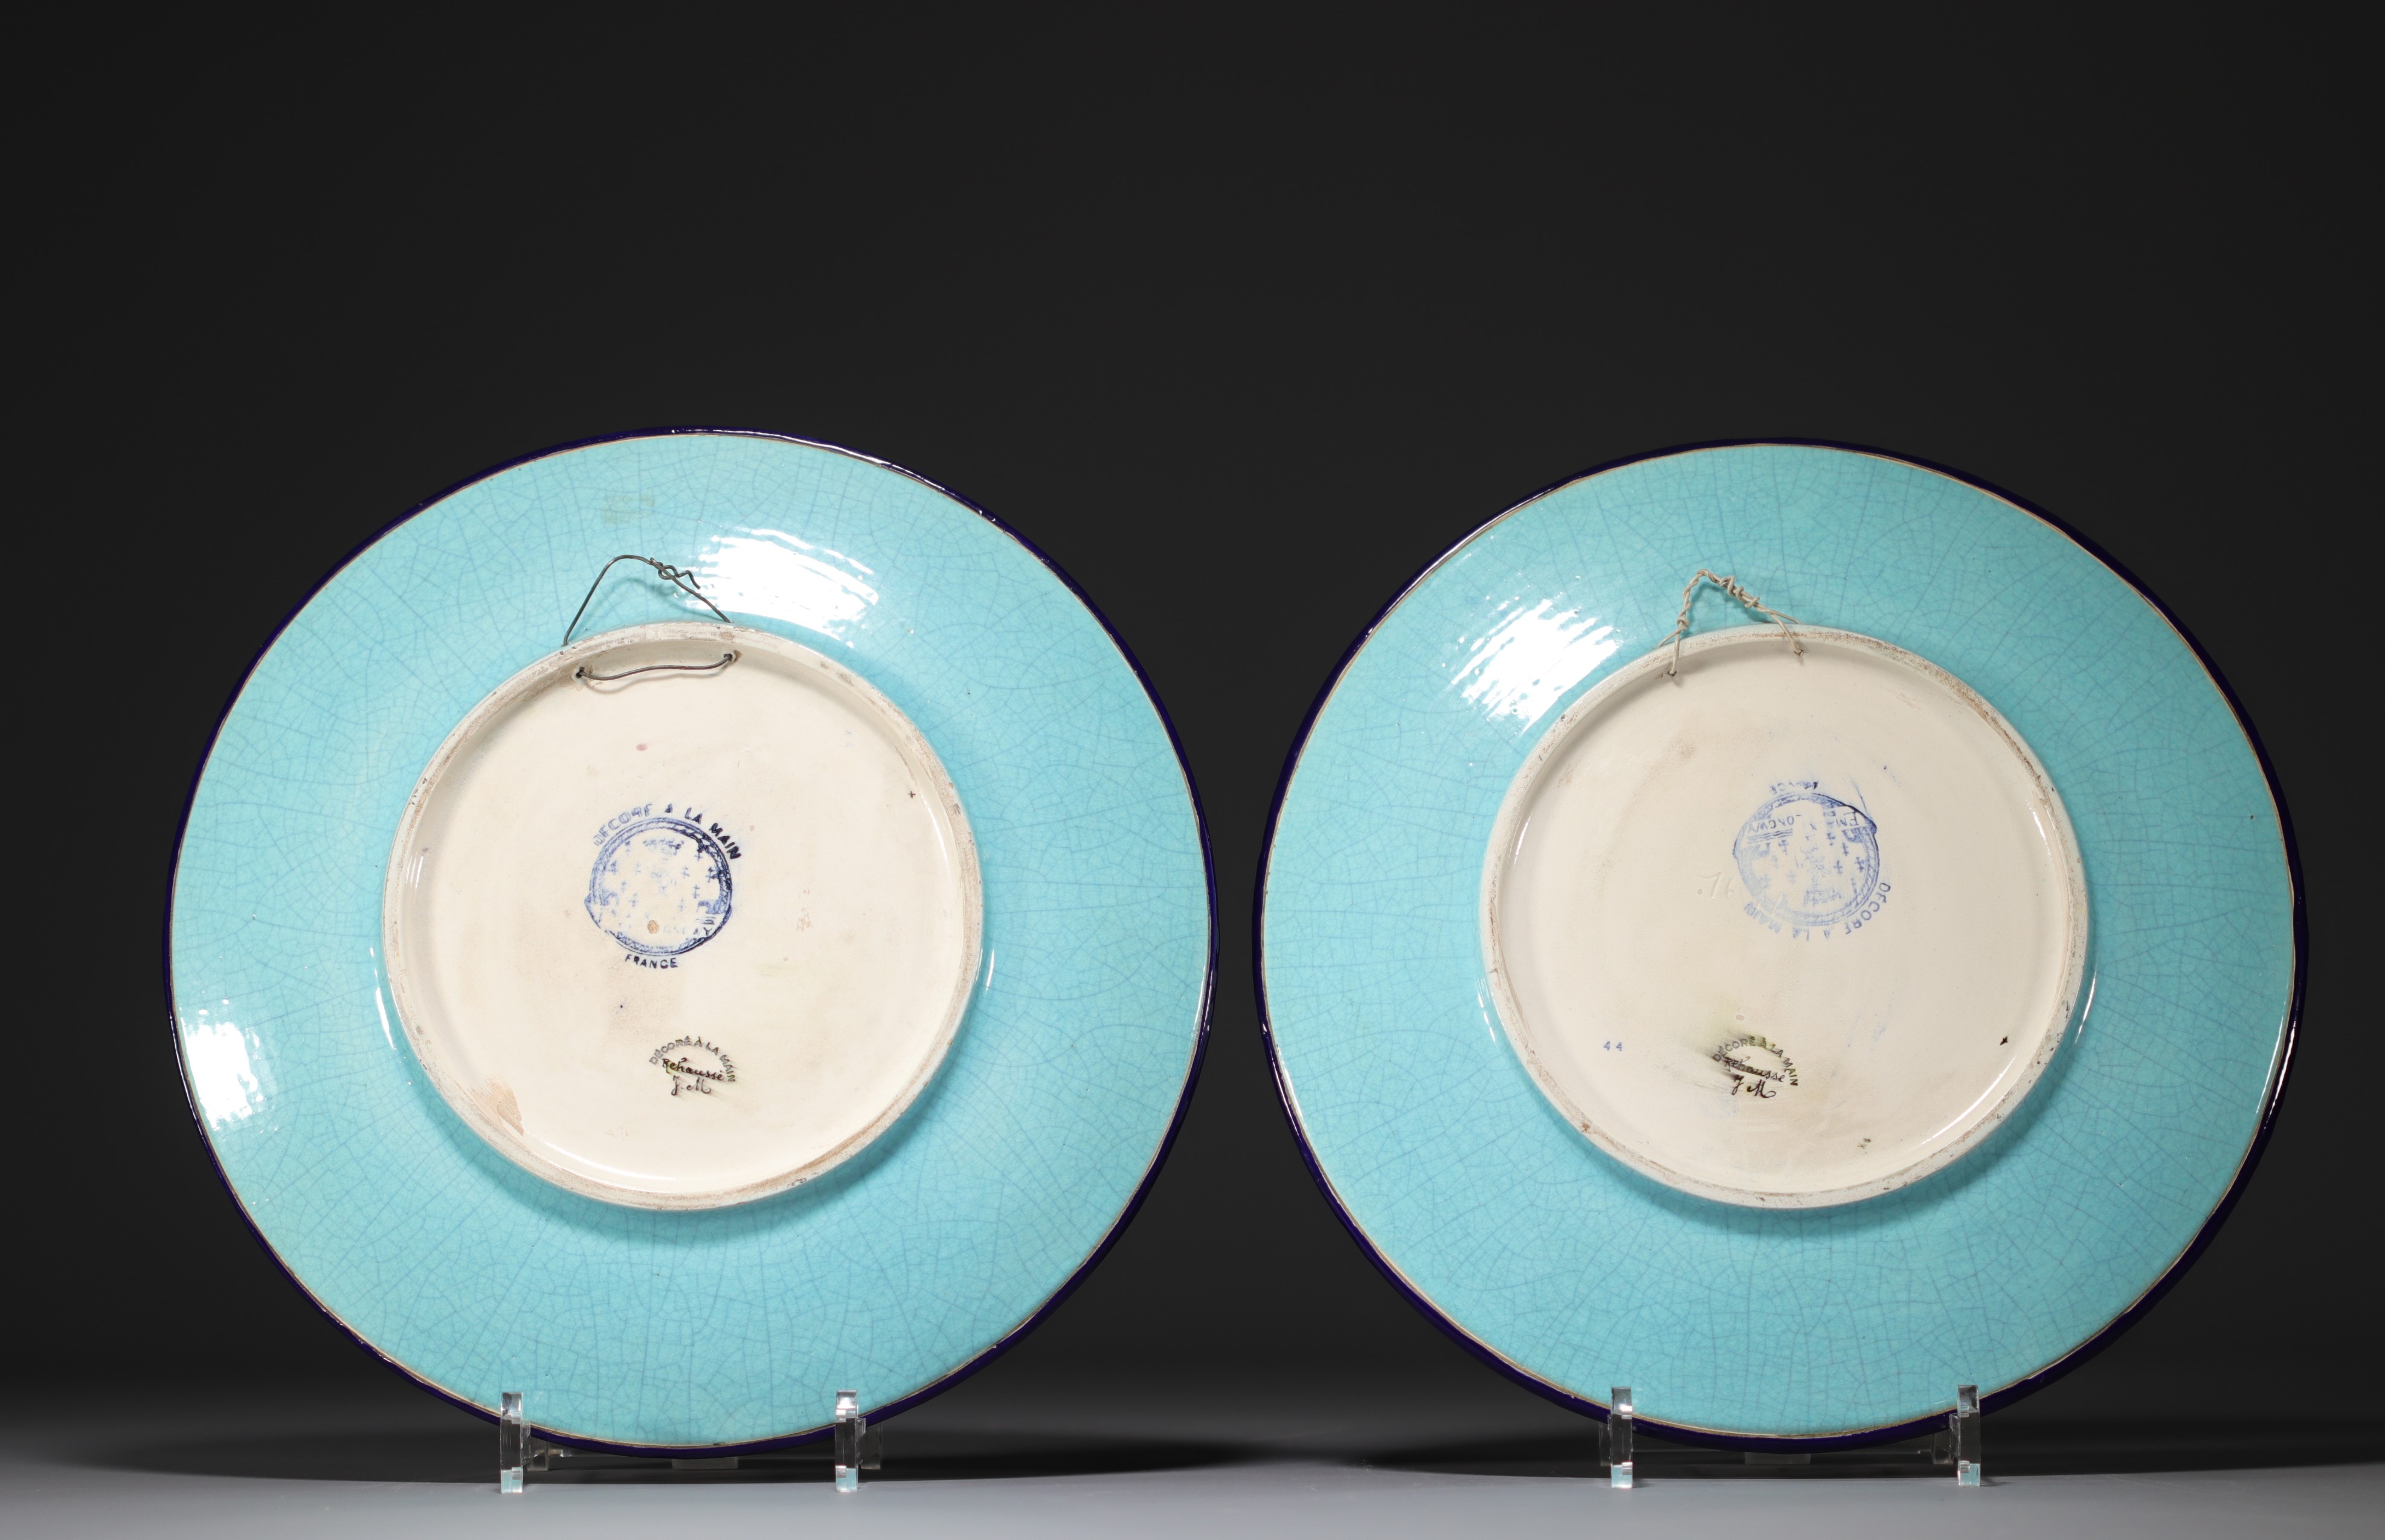 Longwy - Pair of large enameled plates decorated with cranes. - Image 2 of 3